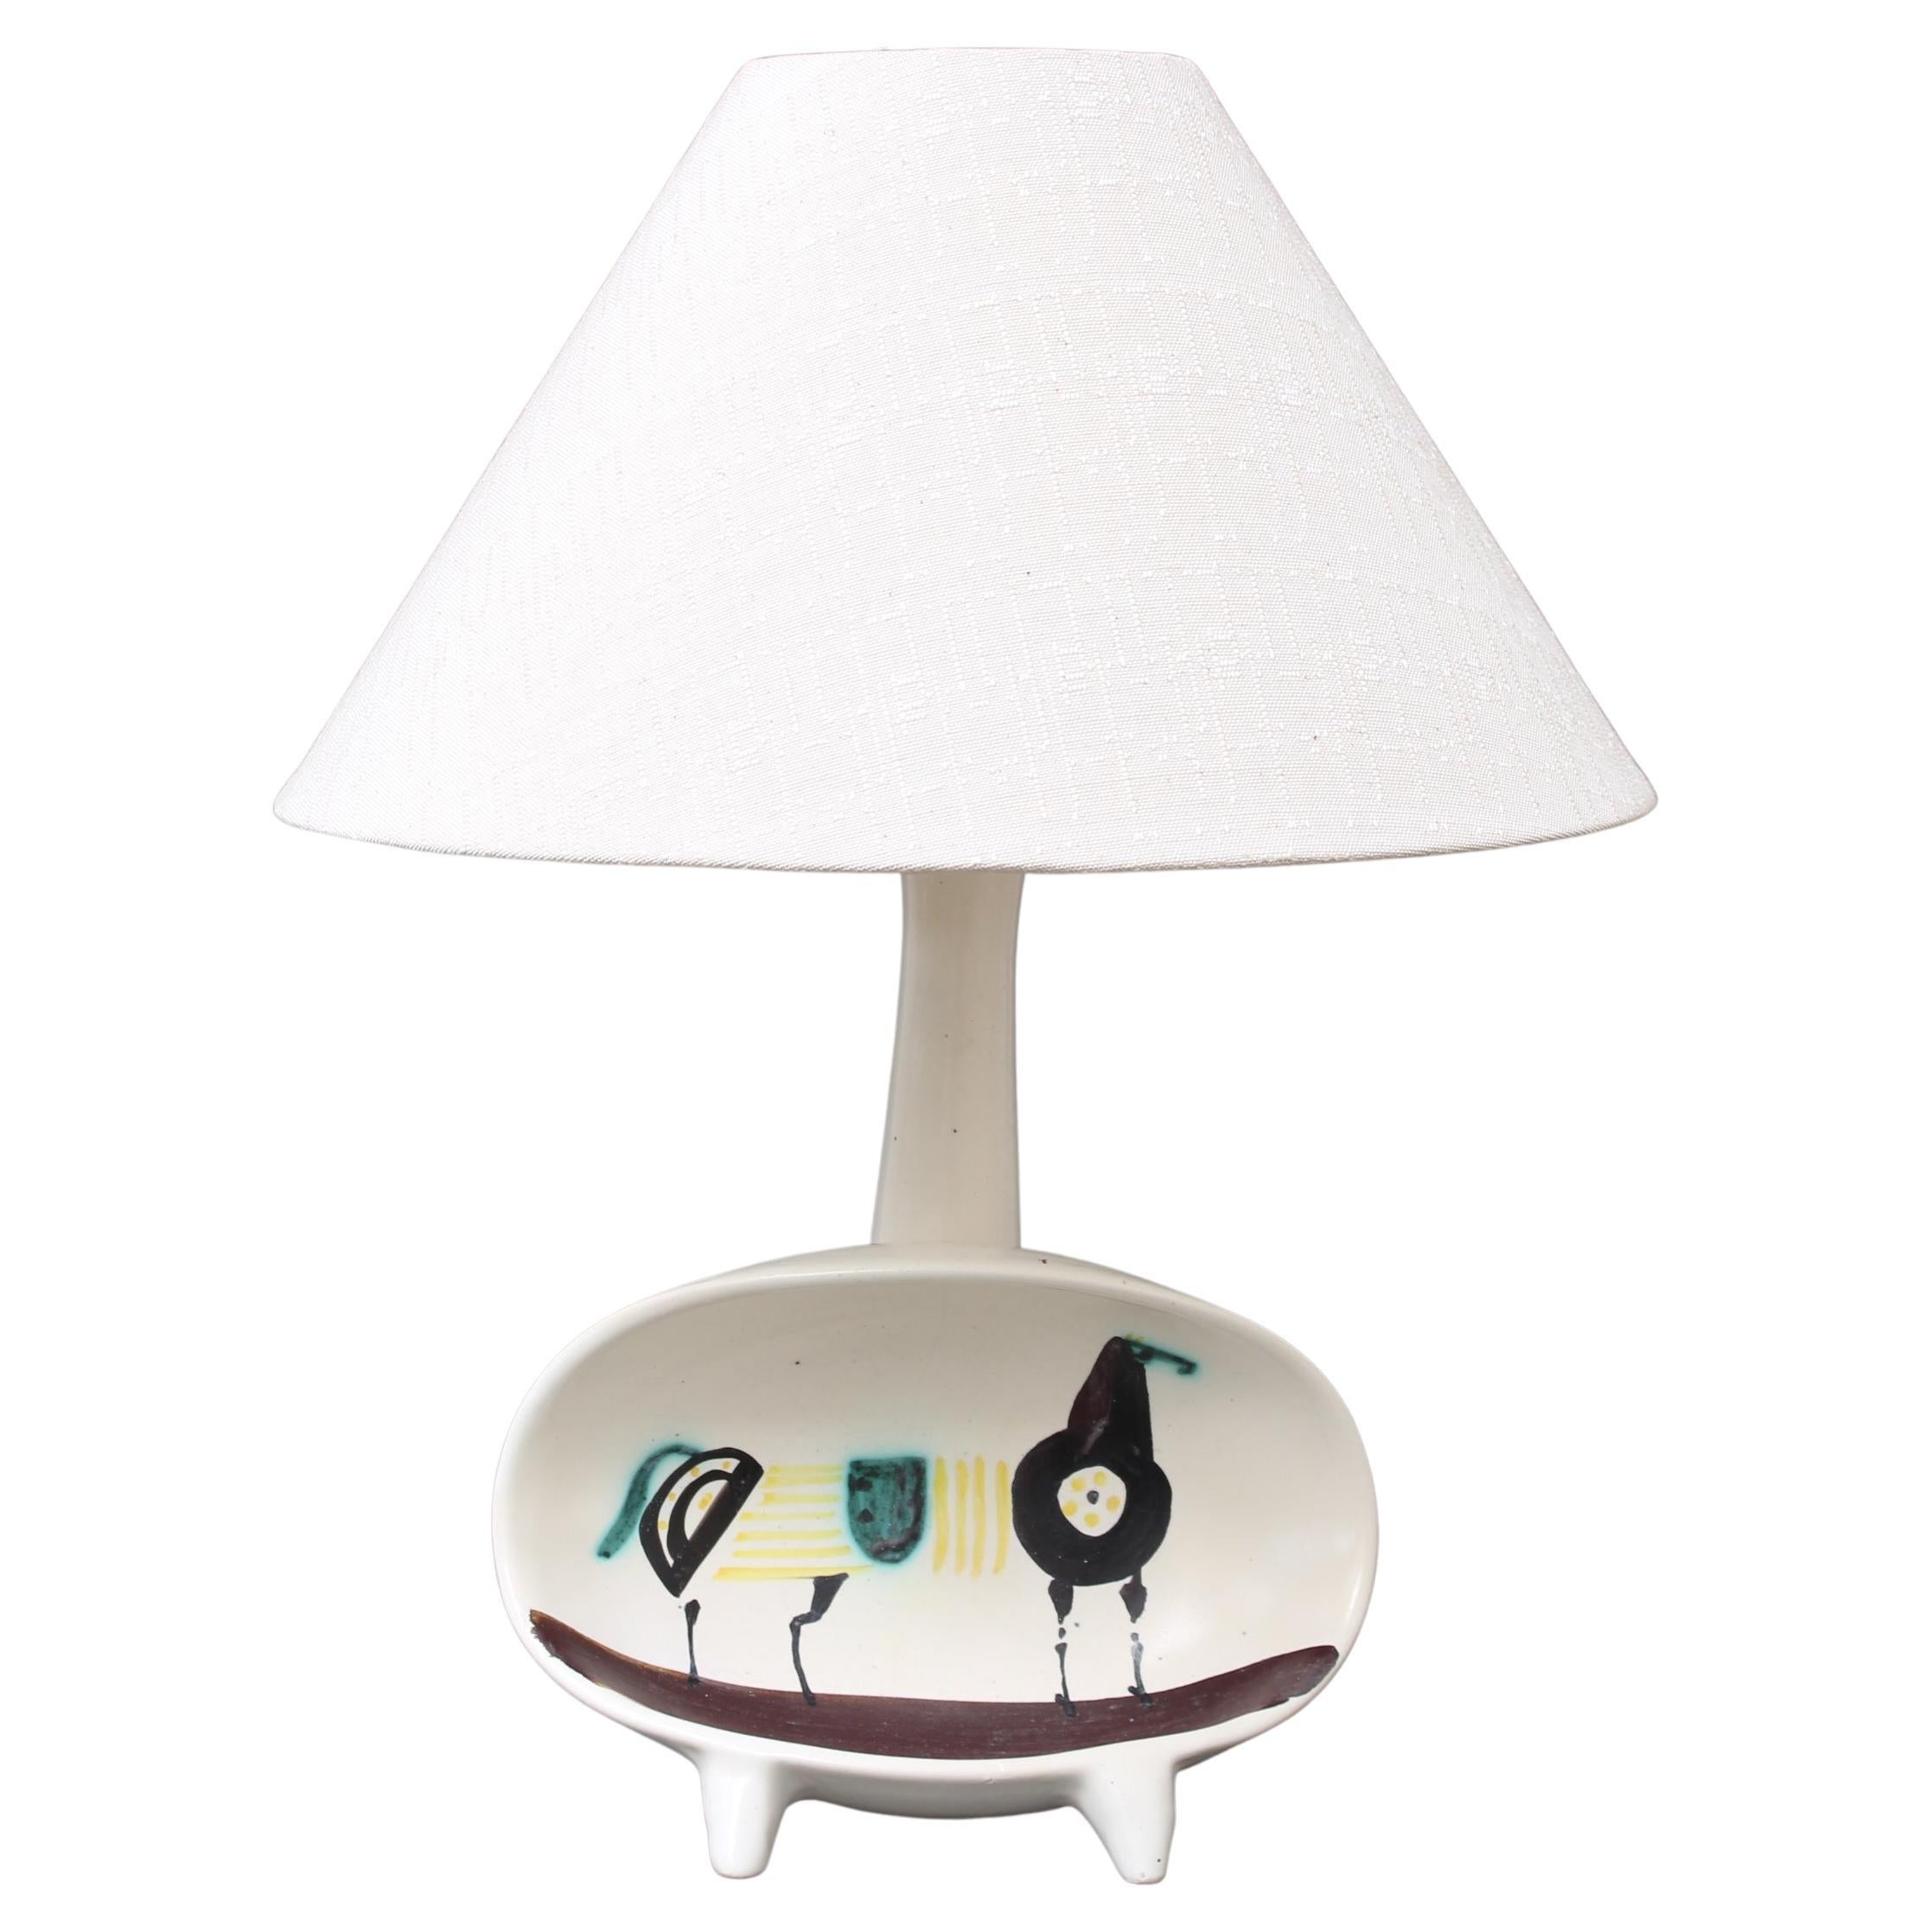 French Vintage Ceramic Table Lamp by Roger Capron, 'circa 1950s' For Sale